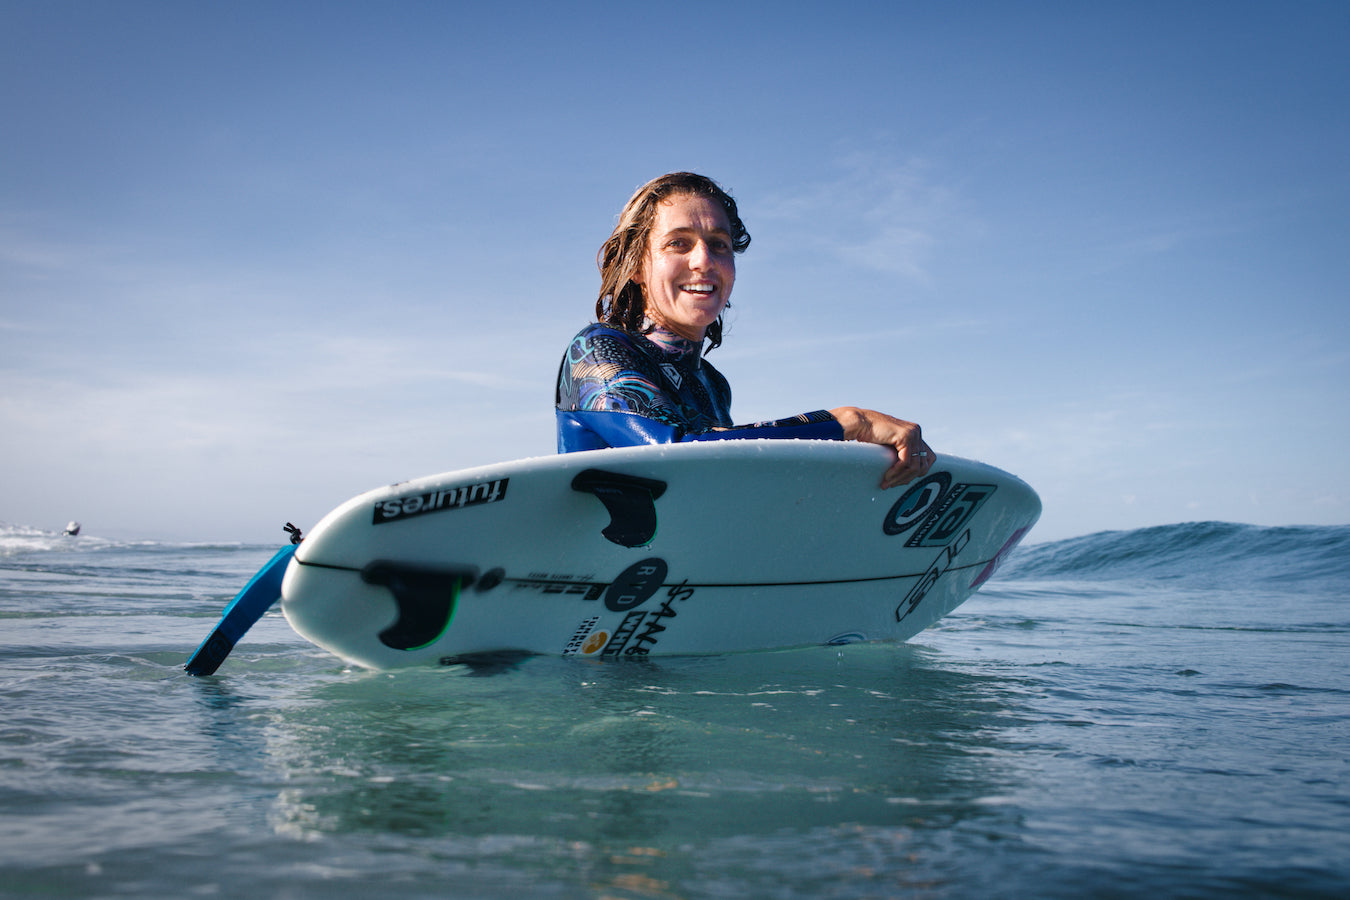 Philippa Anderson - More than just a pro surfer